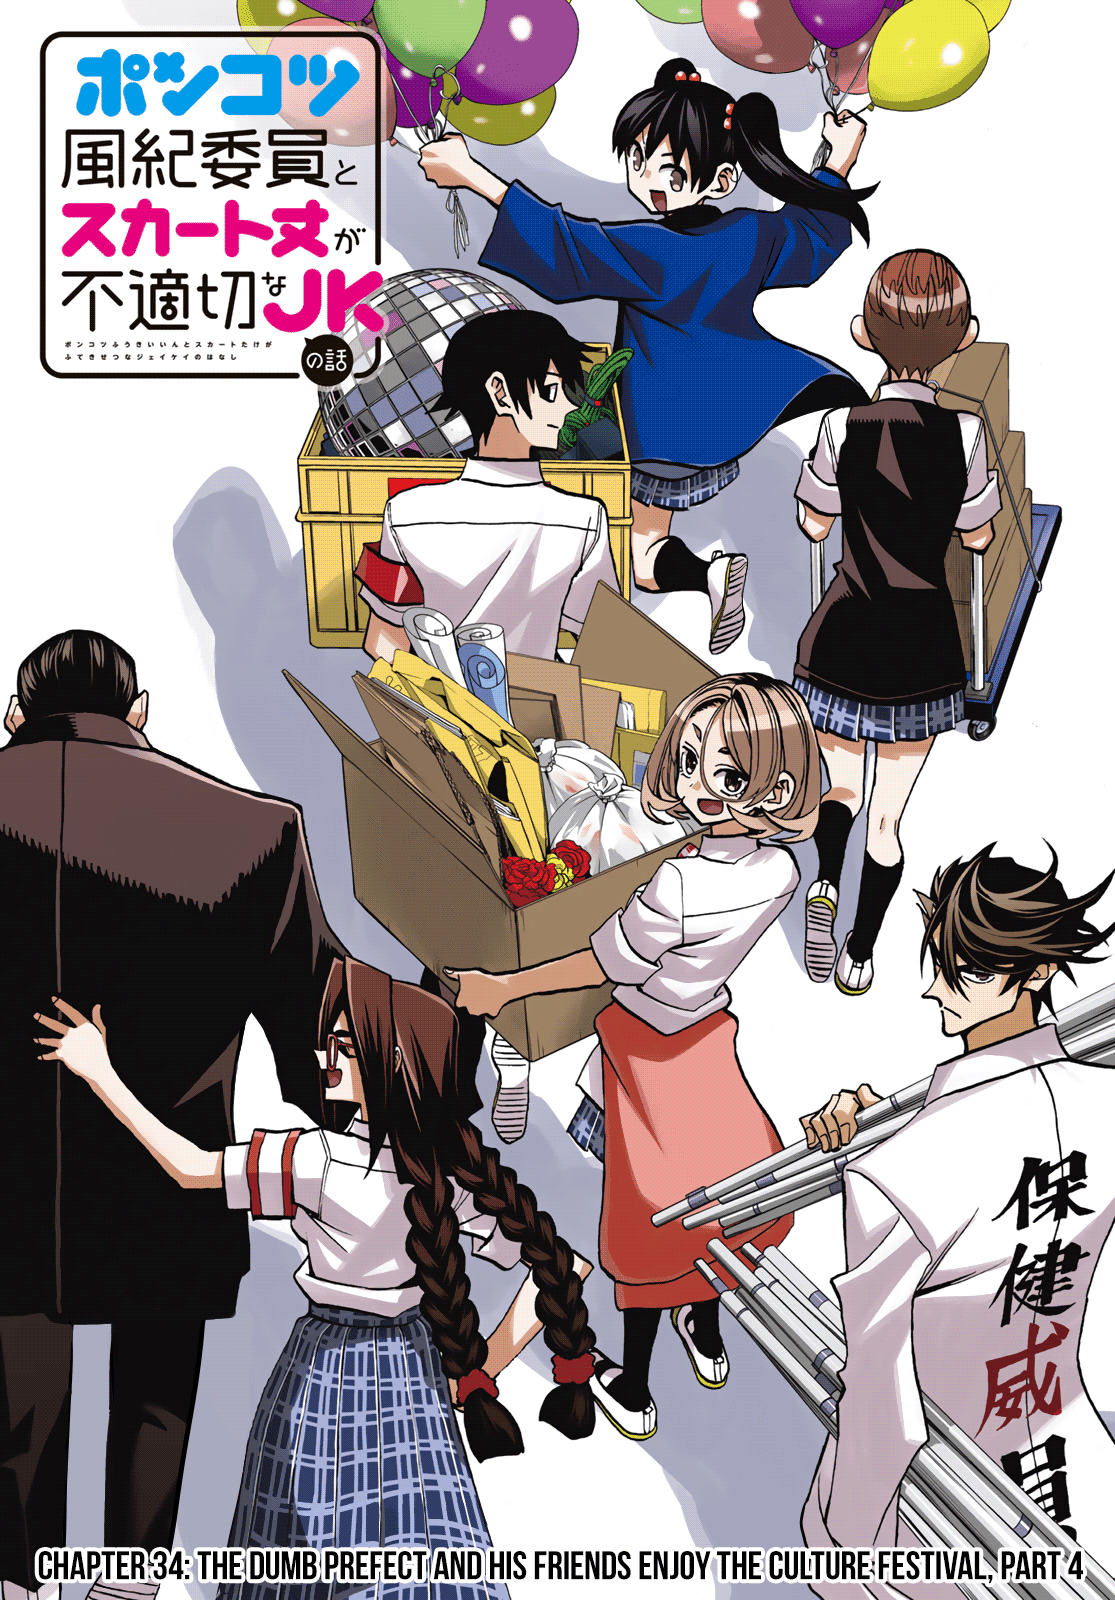 The Story Between A Dumb Prefect And A High School Girl With An Inappropriate Skirt Length Chapter 34: The Dumb Prefect And His Friends Enjoy The Culture Festival, Part 4 - Picture 2